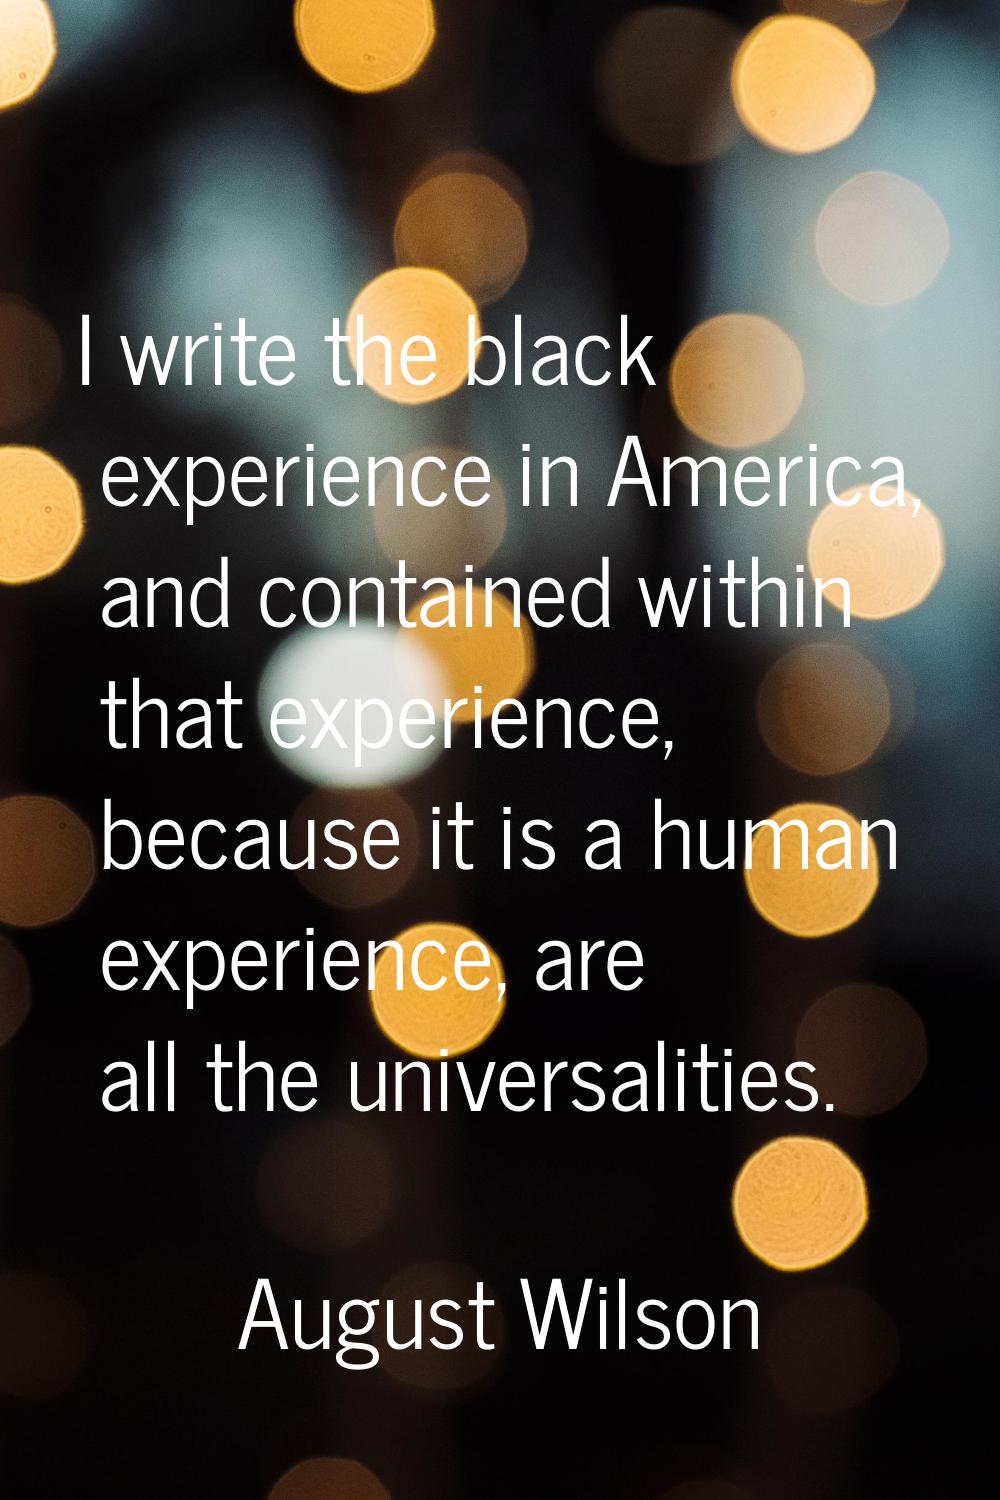 I write the black experience in America, and contained within that experience, because it is a huma